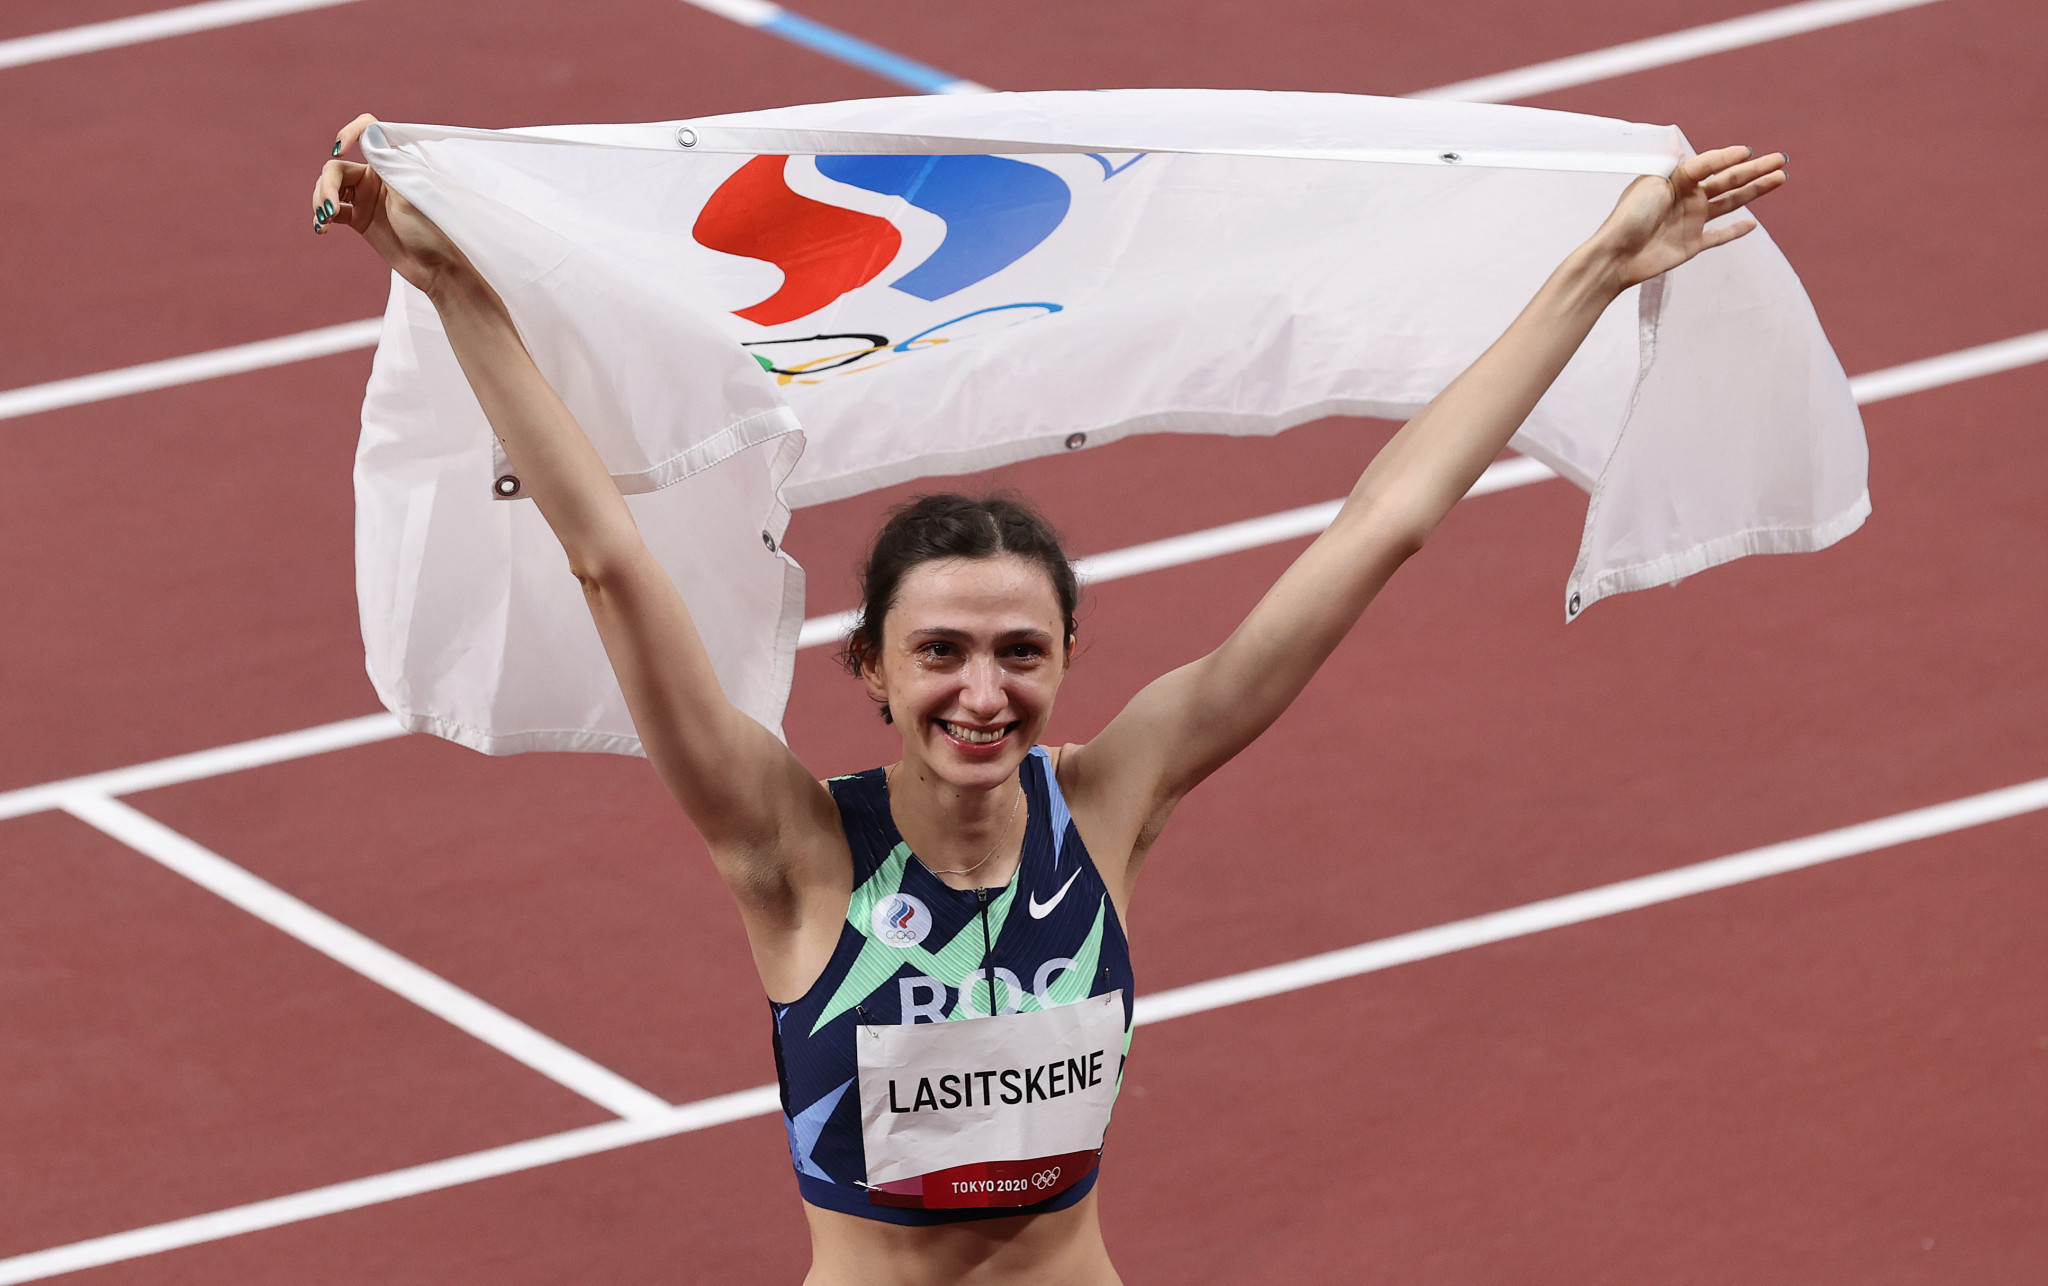 Russian Sports Minister Oleg Matytsin hopes a ban on the Russian Athletics Federation will be lifted in 2022 so athletes like Olympic high jump champion Maria Lasitskene can compete under the country's flag ©Getty Images